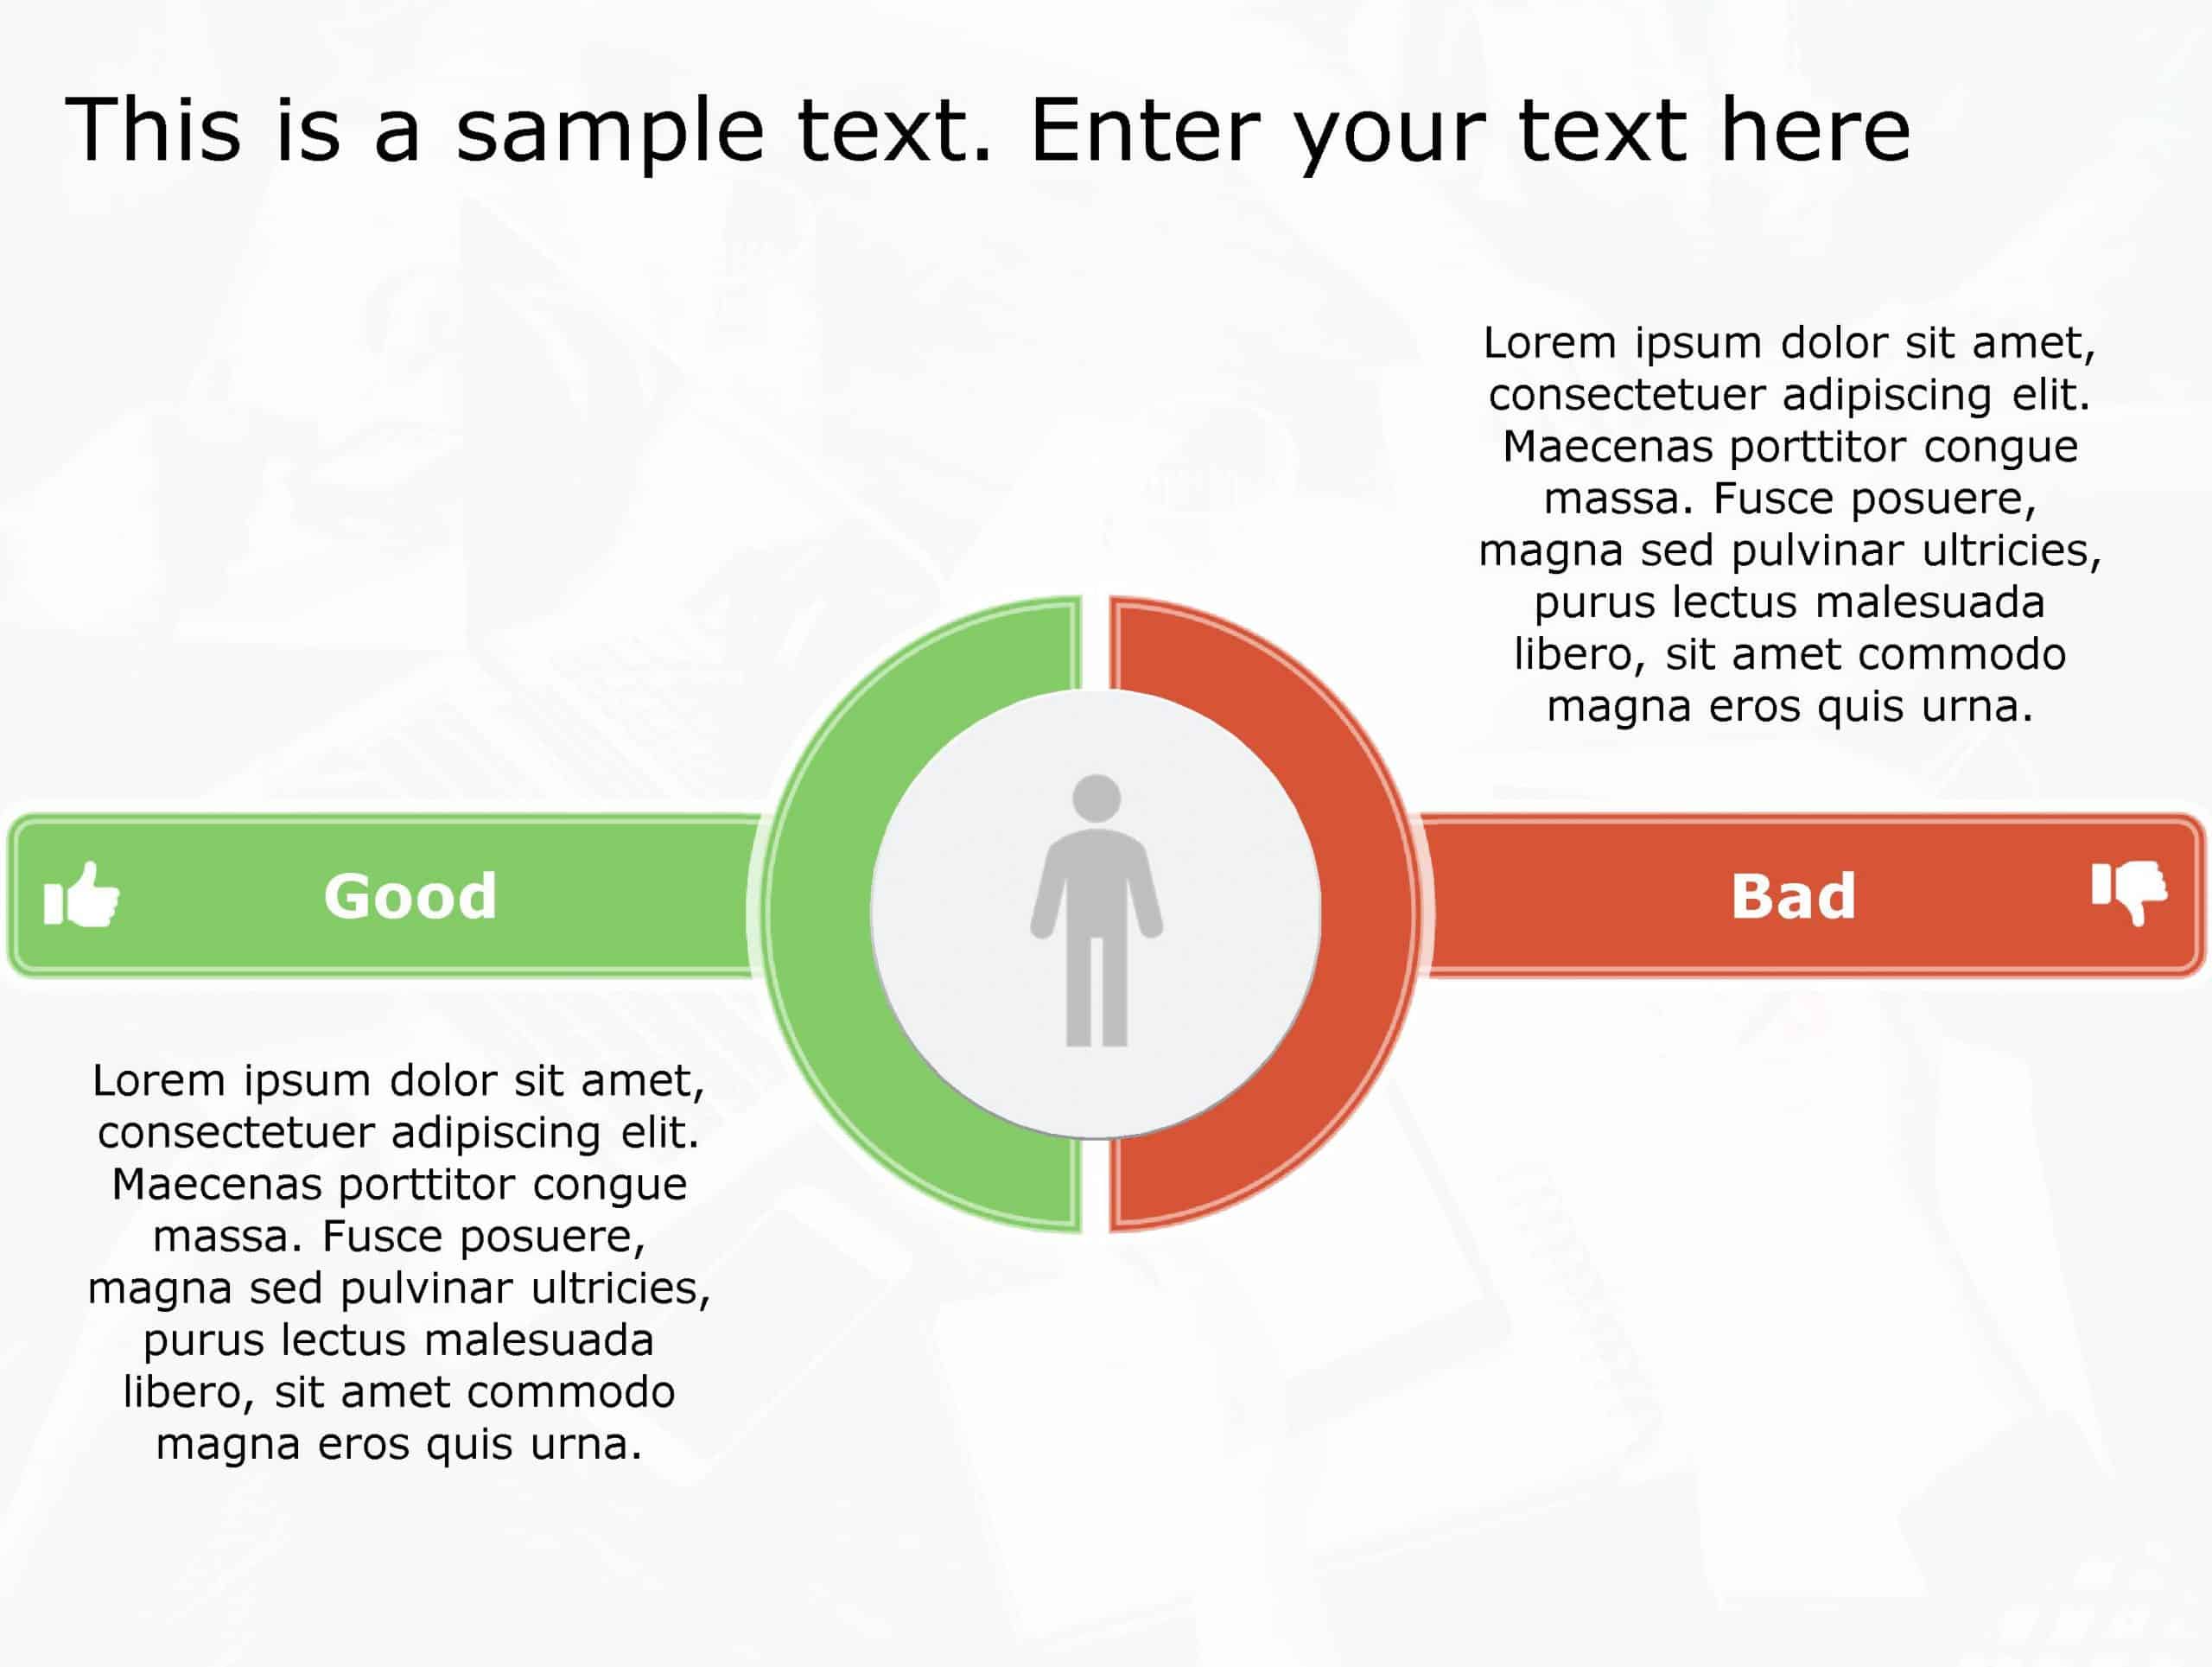 Good Bad 66 PowerPoint Template